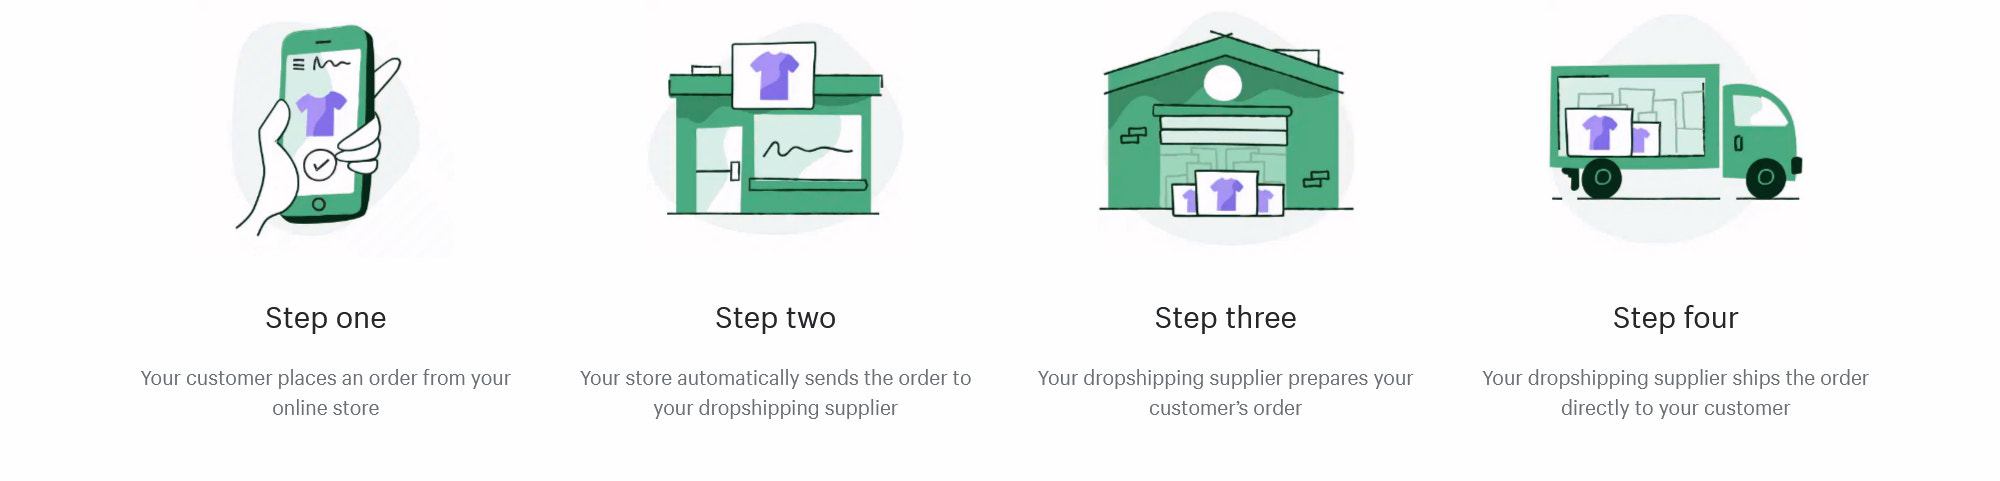 four step process for dropshipping